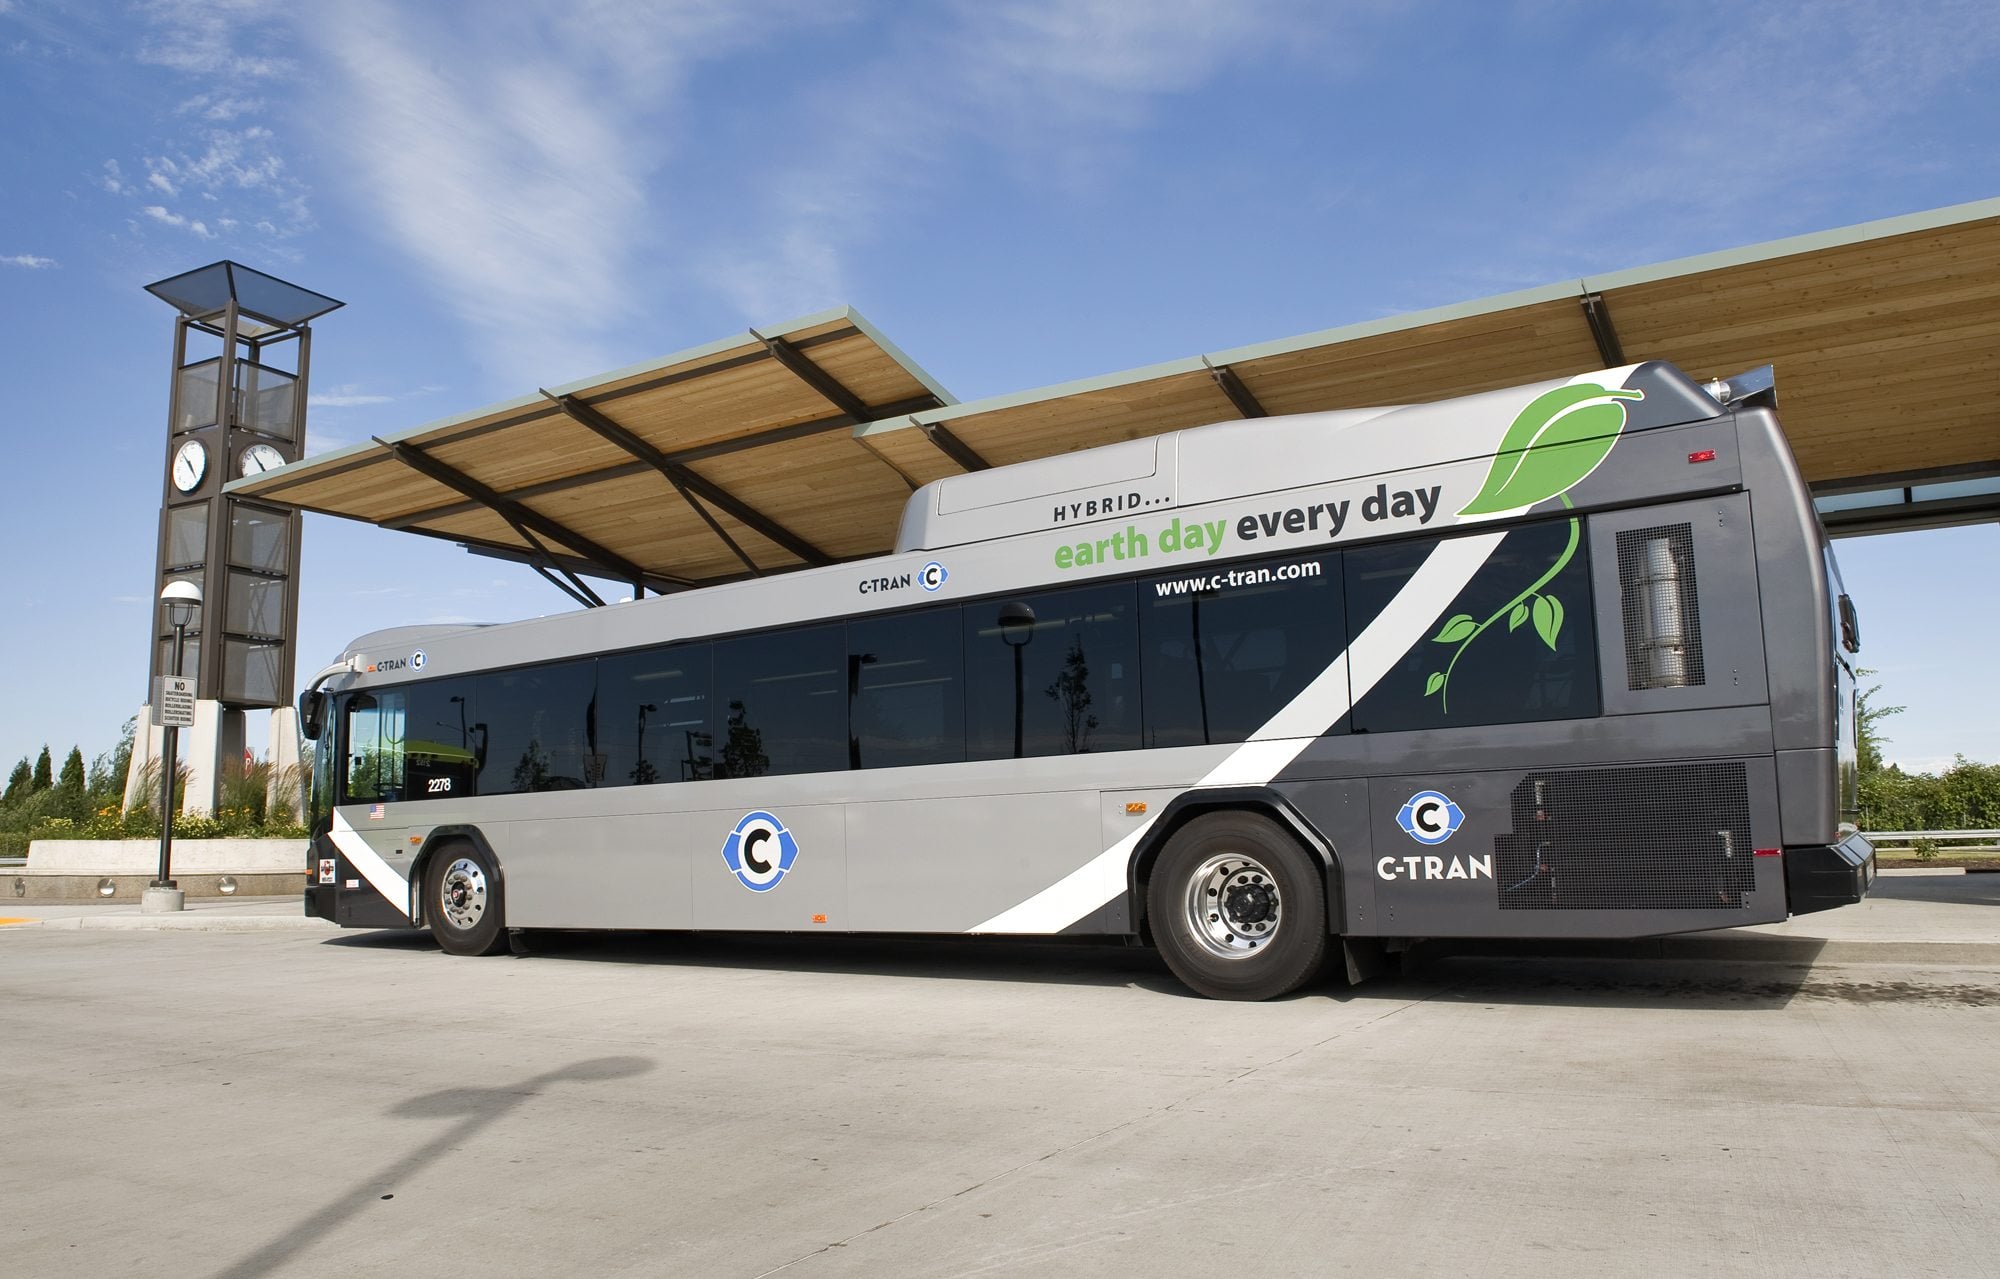 C-Tran Board members have advanced a proposal that could equip the agency's buses with a new electronic fare system, and install mobile data terminals and wireless communication capability.